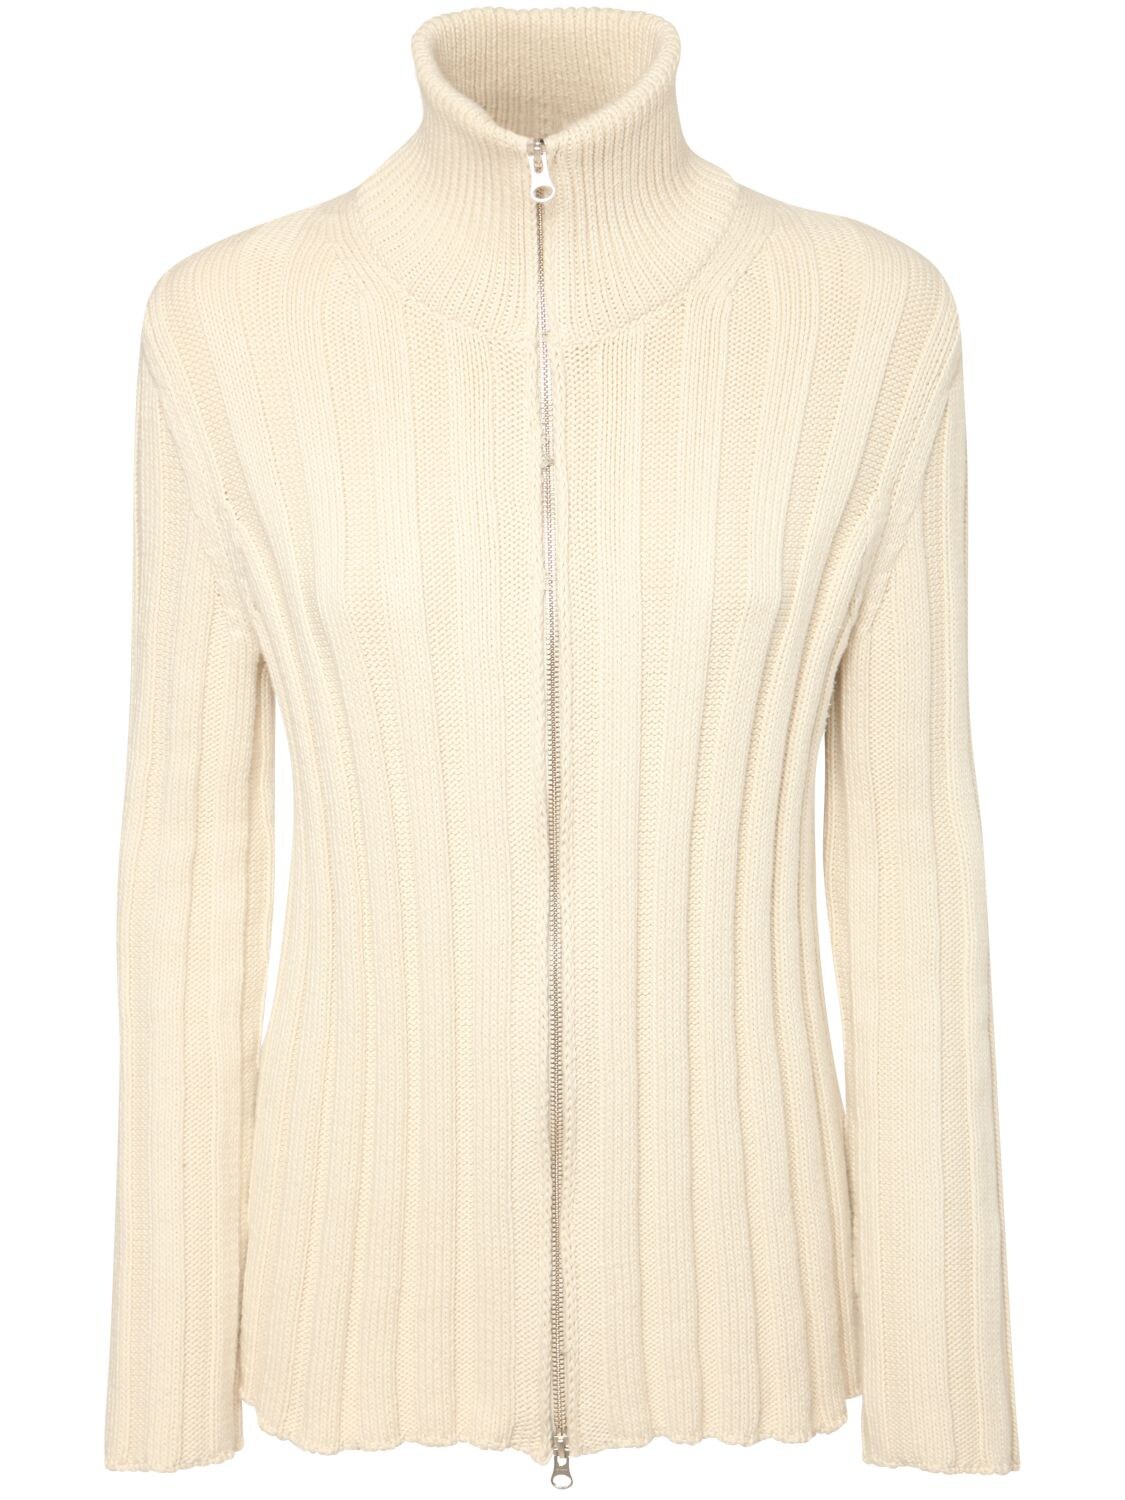 Mm6 Maison Margiela Logo Ribbed Knit Cotton Zip Jumper In Off-white